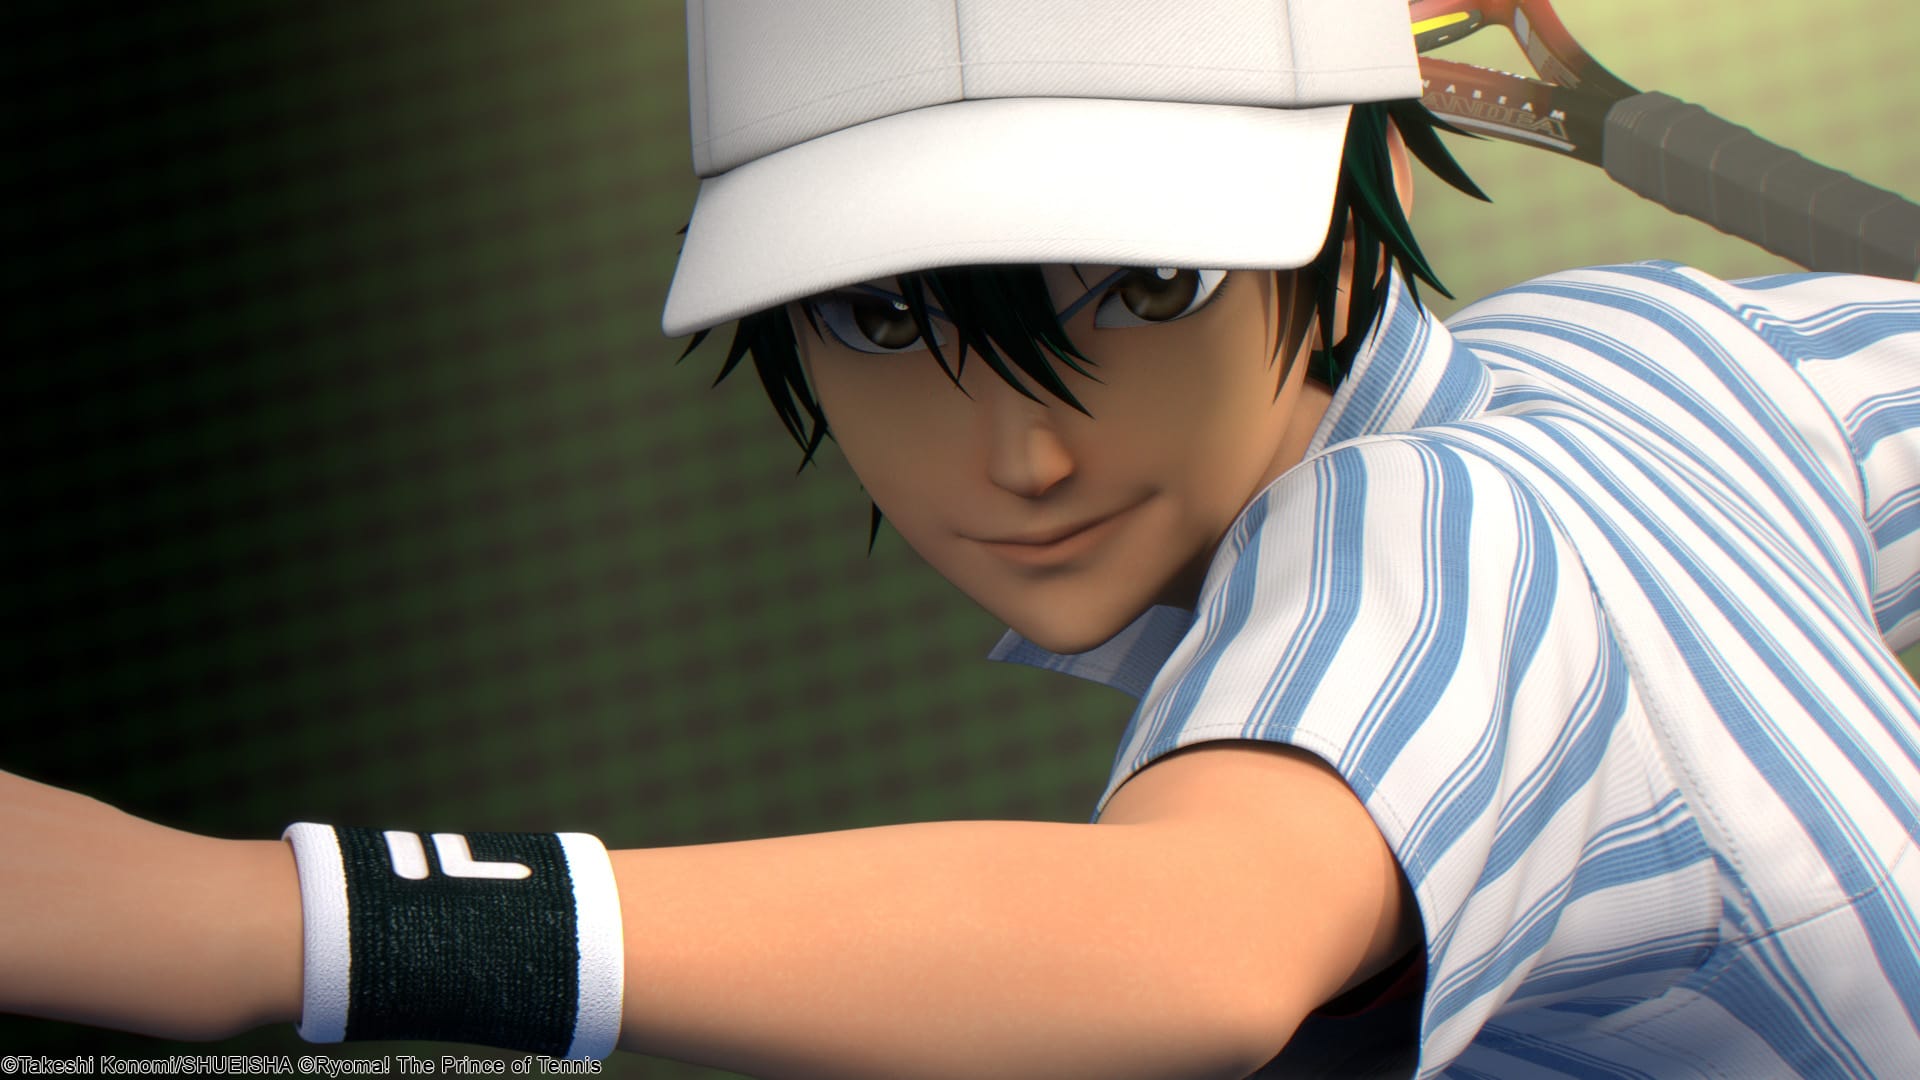 Ryoma! The Prince of Tennis Decide is a Musically Fun Time